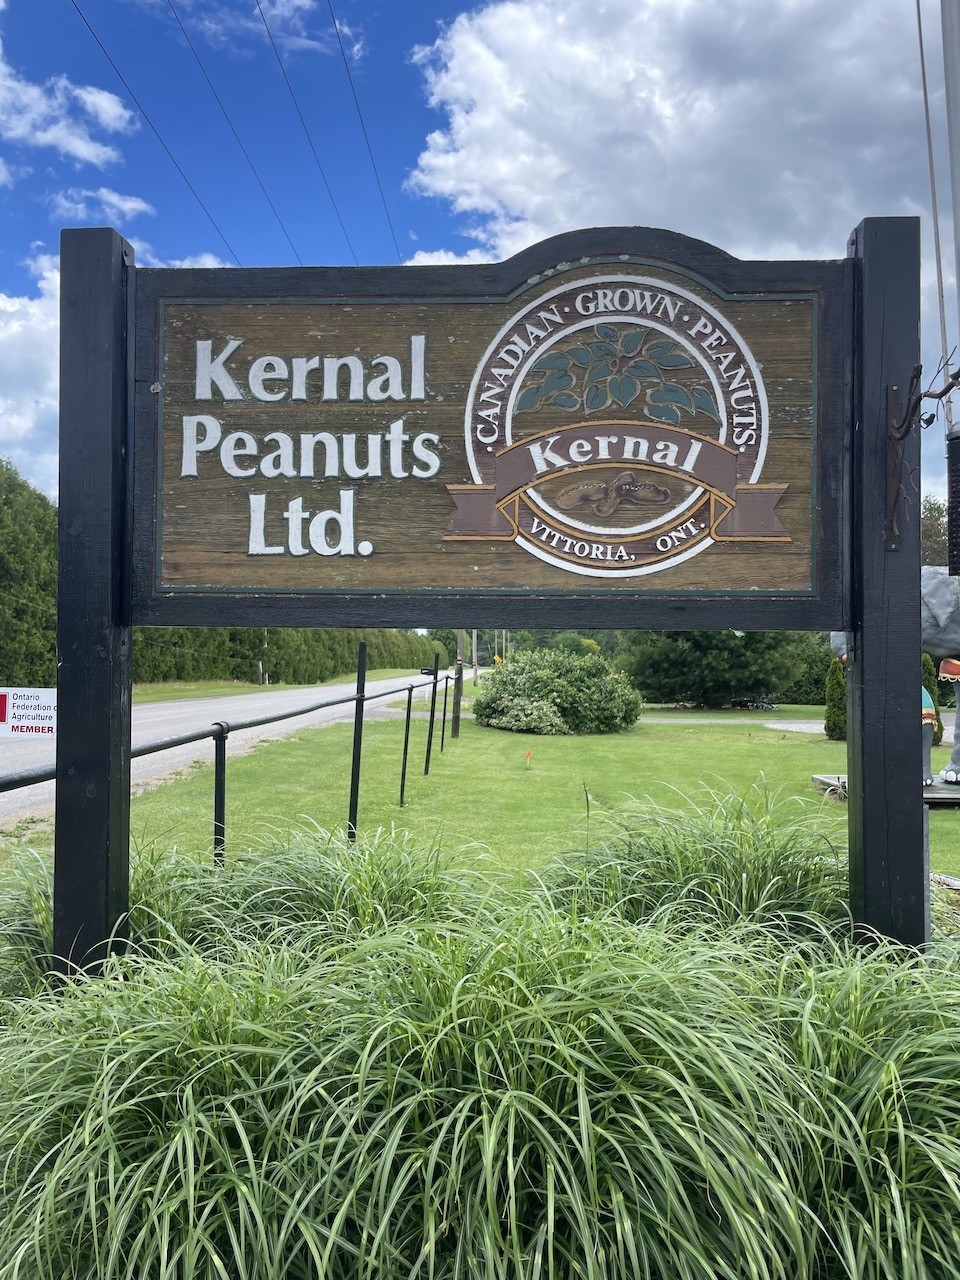 Kernal Peanuts Ltd Sign in Vittoria Ontario - The Kernal Peanuts Sign makes it easy for guests to know where to find the store in Vittoria, Ontario, Canada.